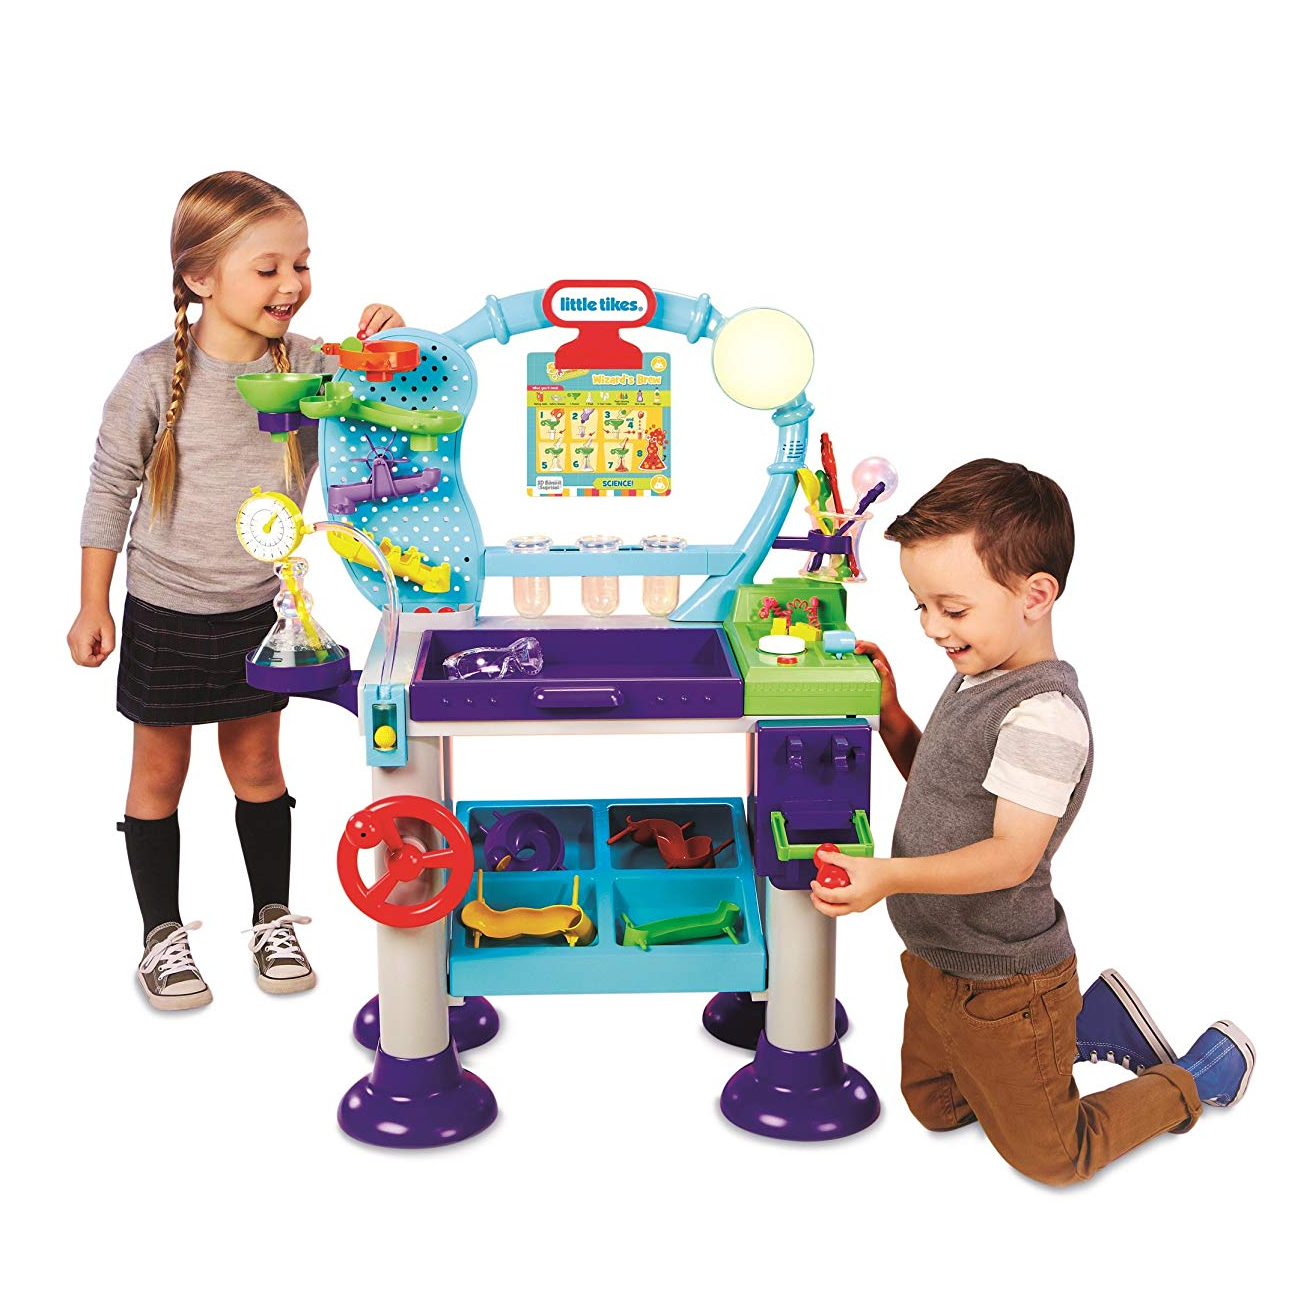 Little Tikes STEM Jr. Wonder Lab Toy with Experiments for Kids Only $60.67! (Reg $119)